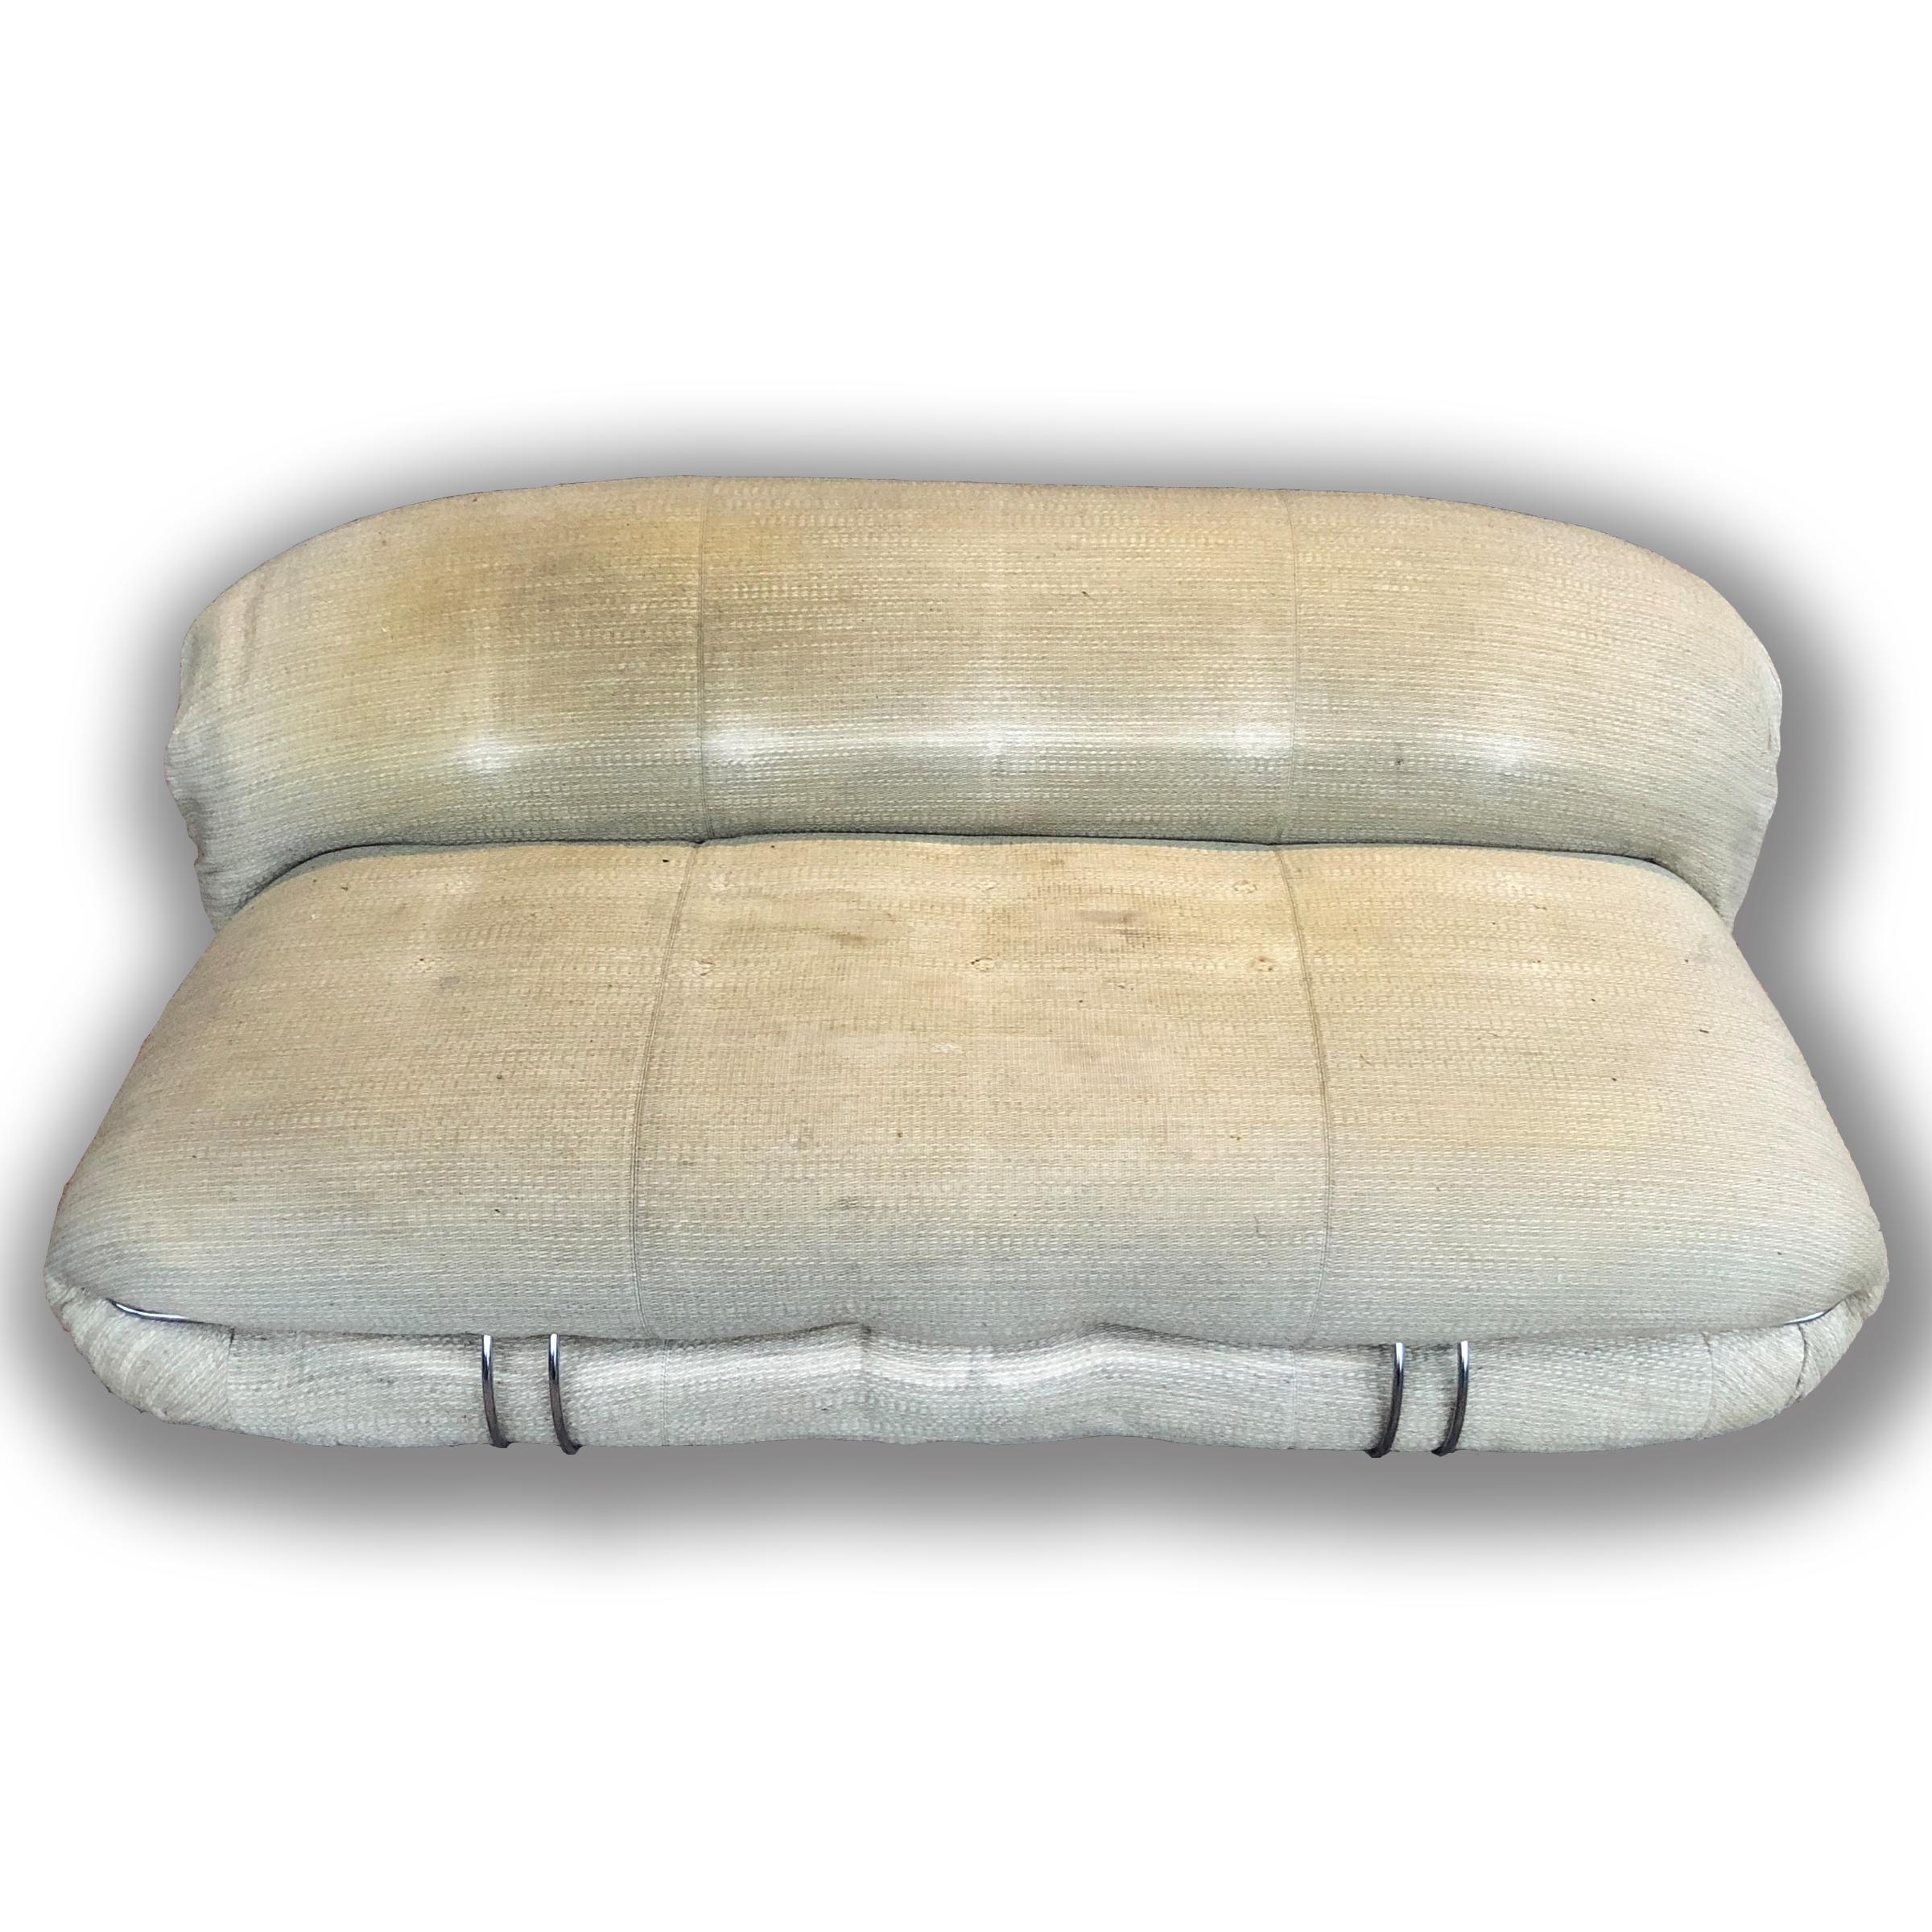 Chrome Afra & Tobia Scarpa Soriana 2-Seat Sofa for Cassina, 1972 'Needs Reupholstery' For Sale